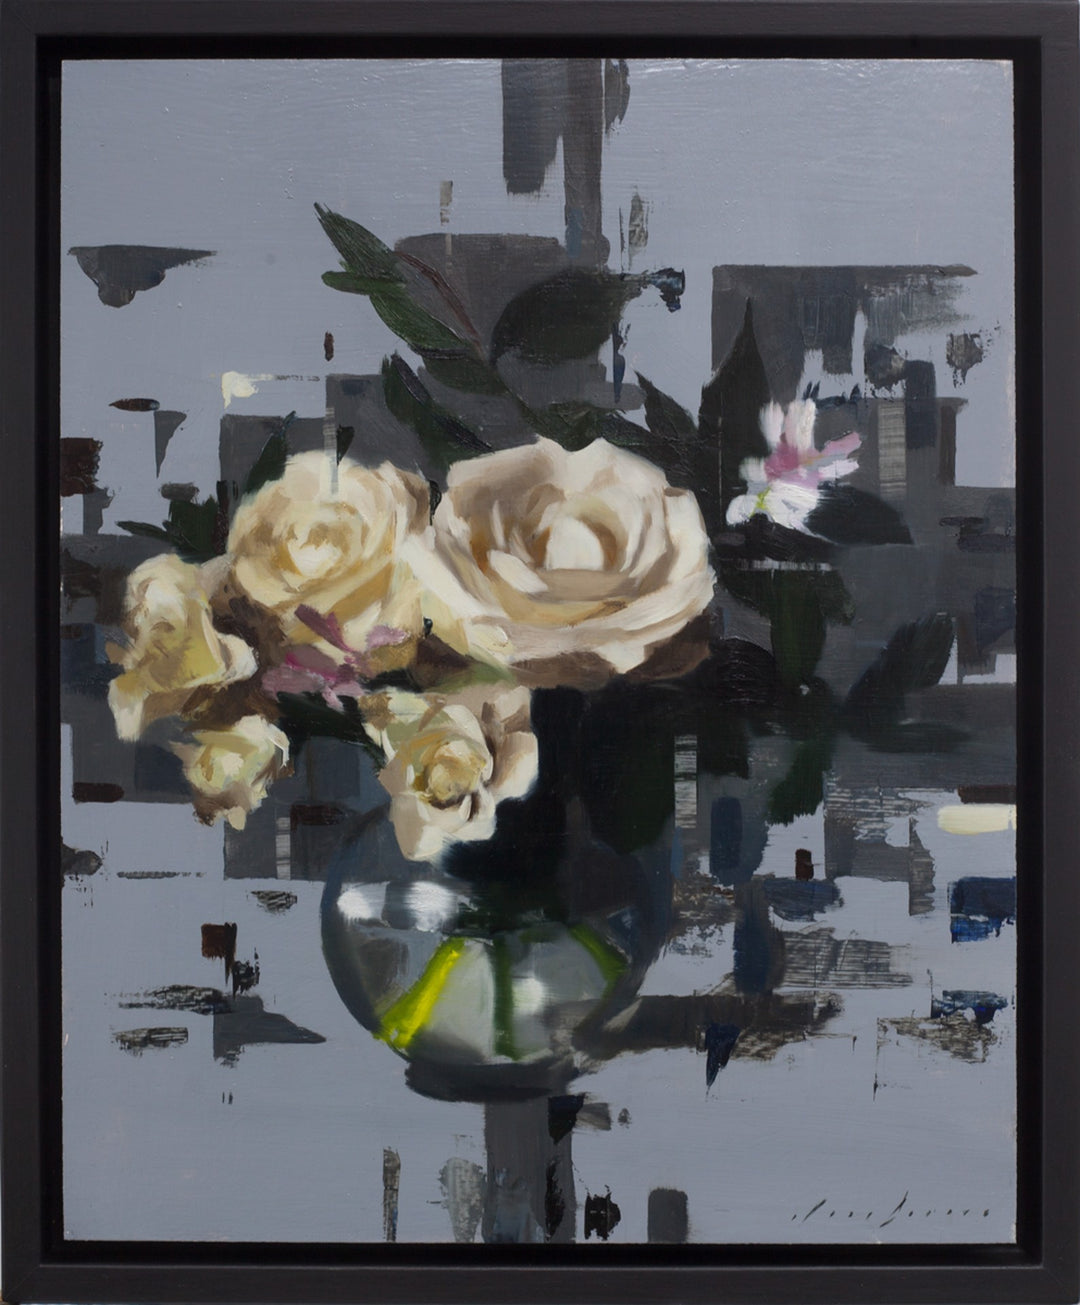 Jon Doran's stunning oil painting "Fragmented Roses" on panel captures the elegance of white roses as they delicately bloom in a glass vase. The artist's unique style showcases fragmented roses, adding intrigue and depth.